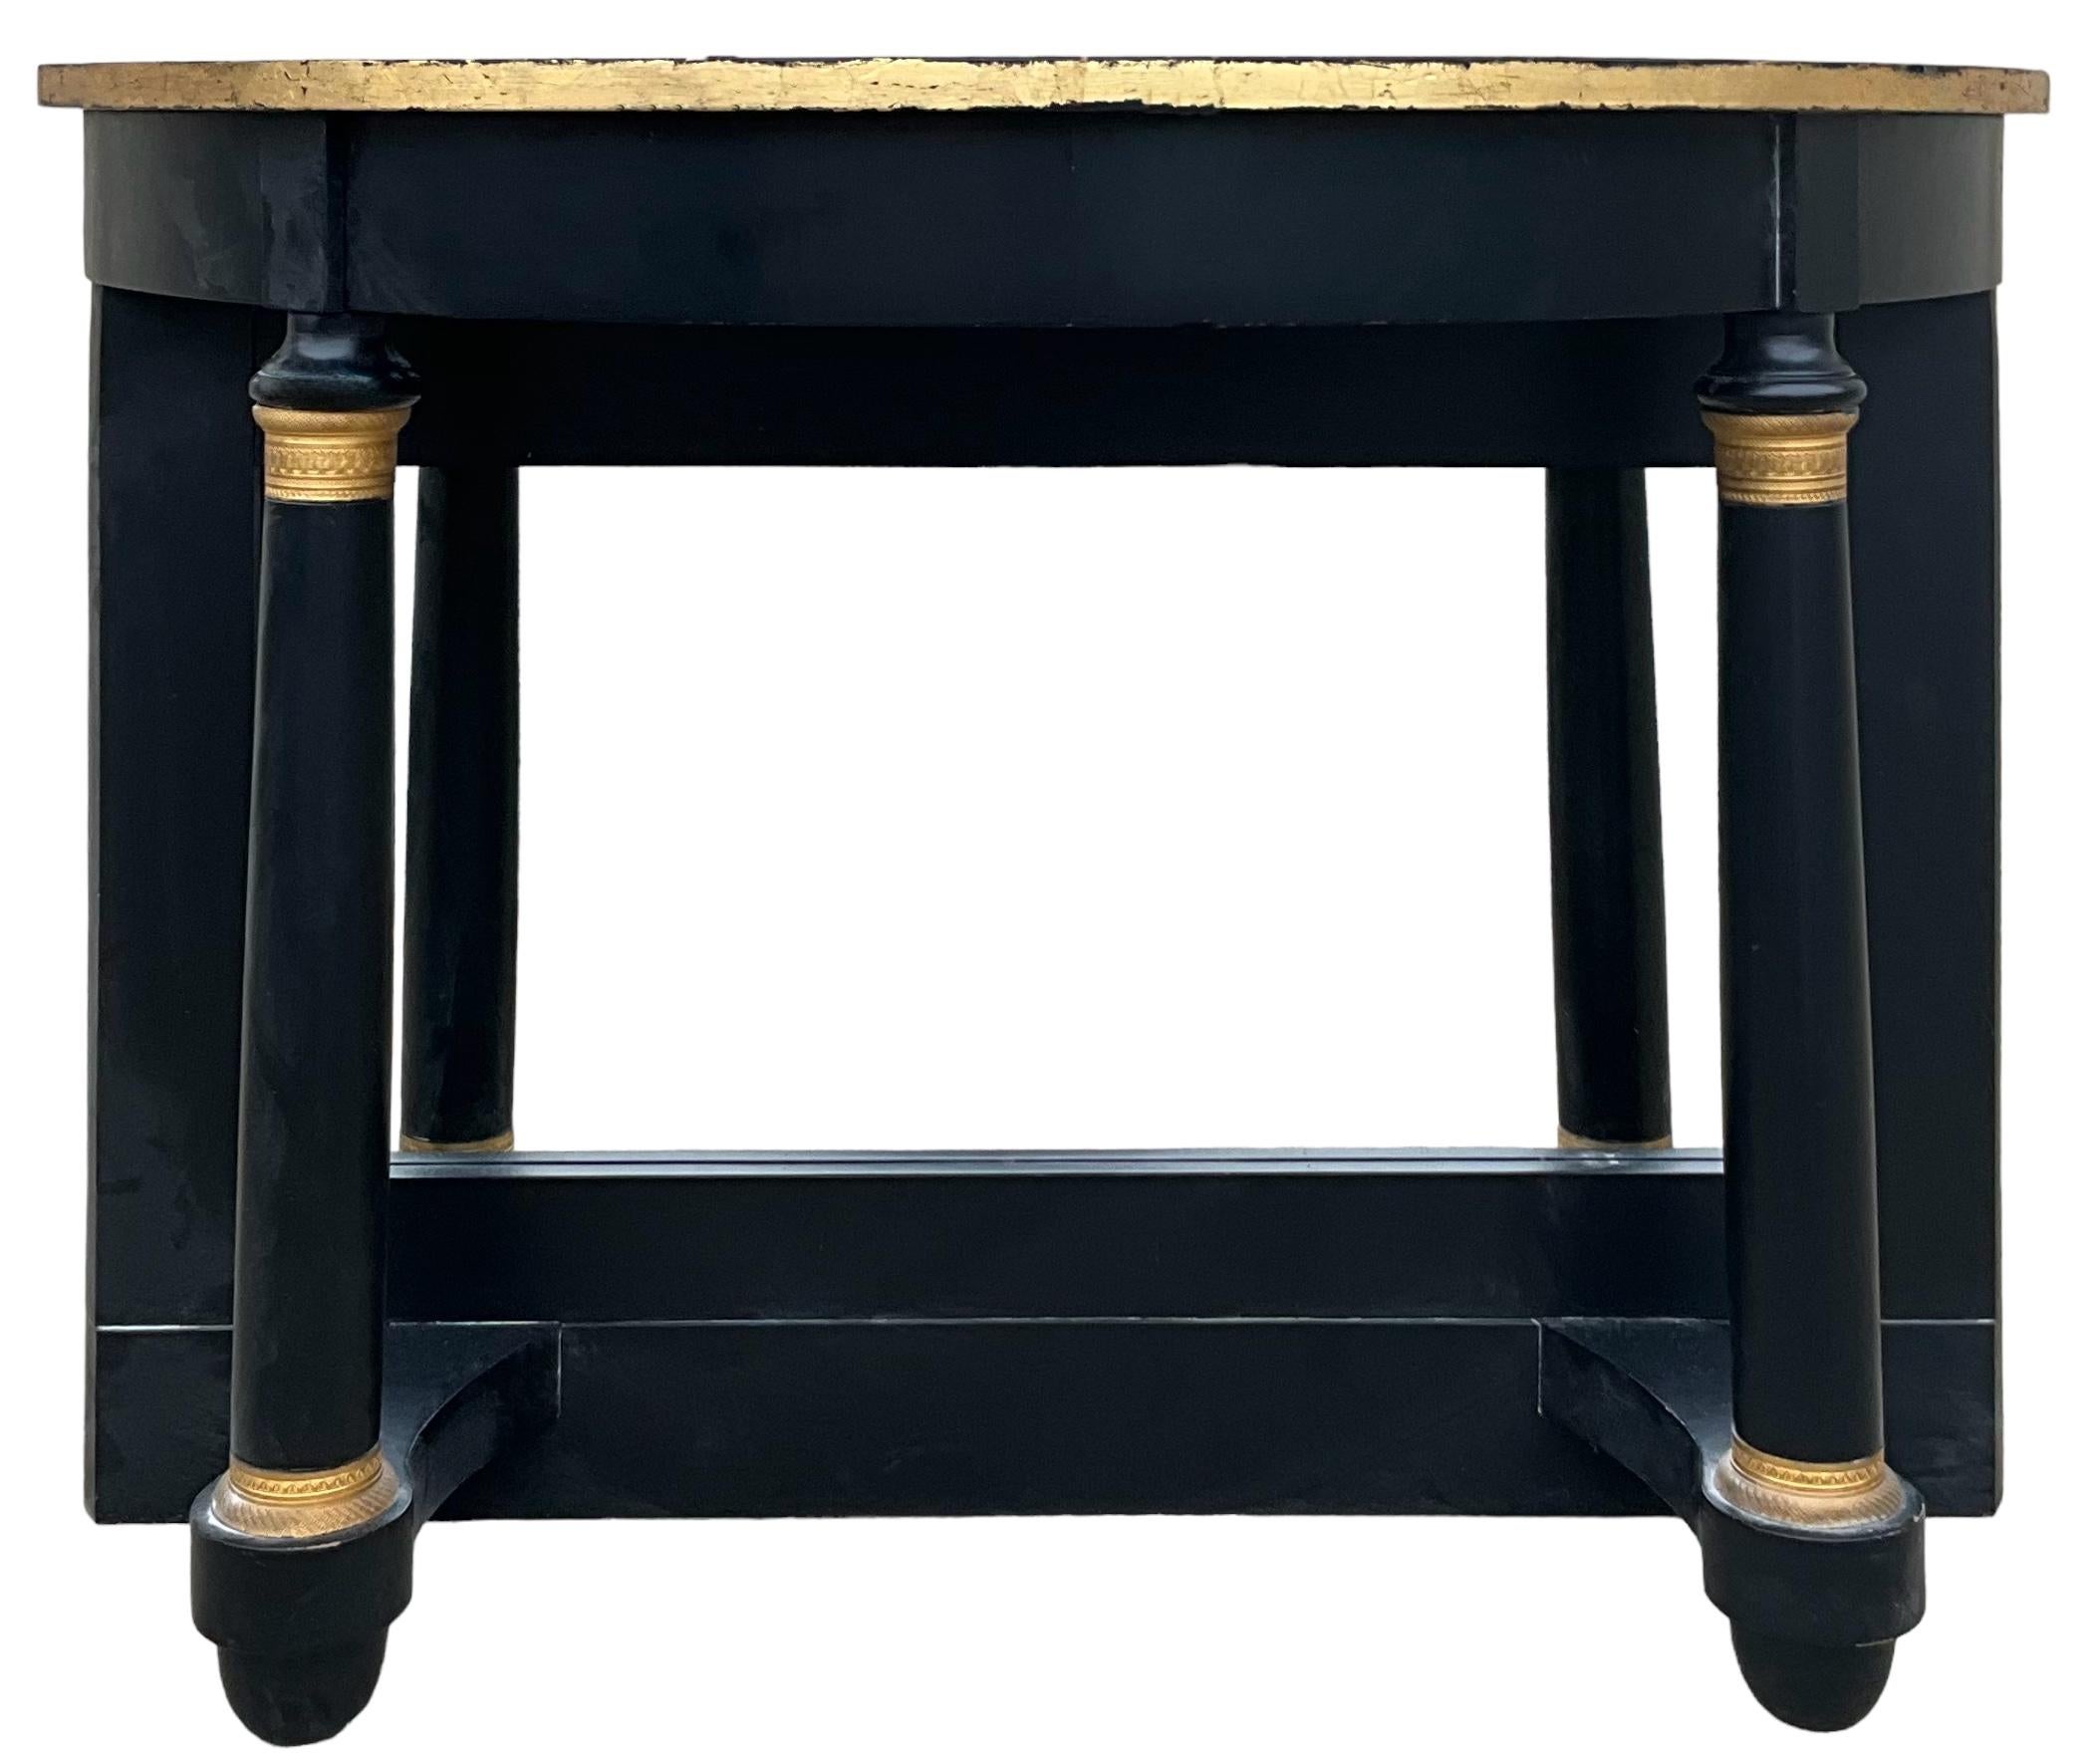 20th Century French Neo-Classical Style Maison Jansen Black & Gilt Bronze Console Tables -S/2 For Sale